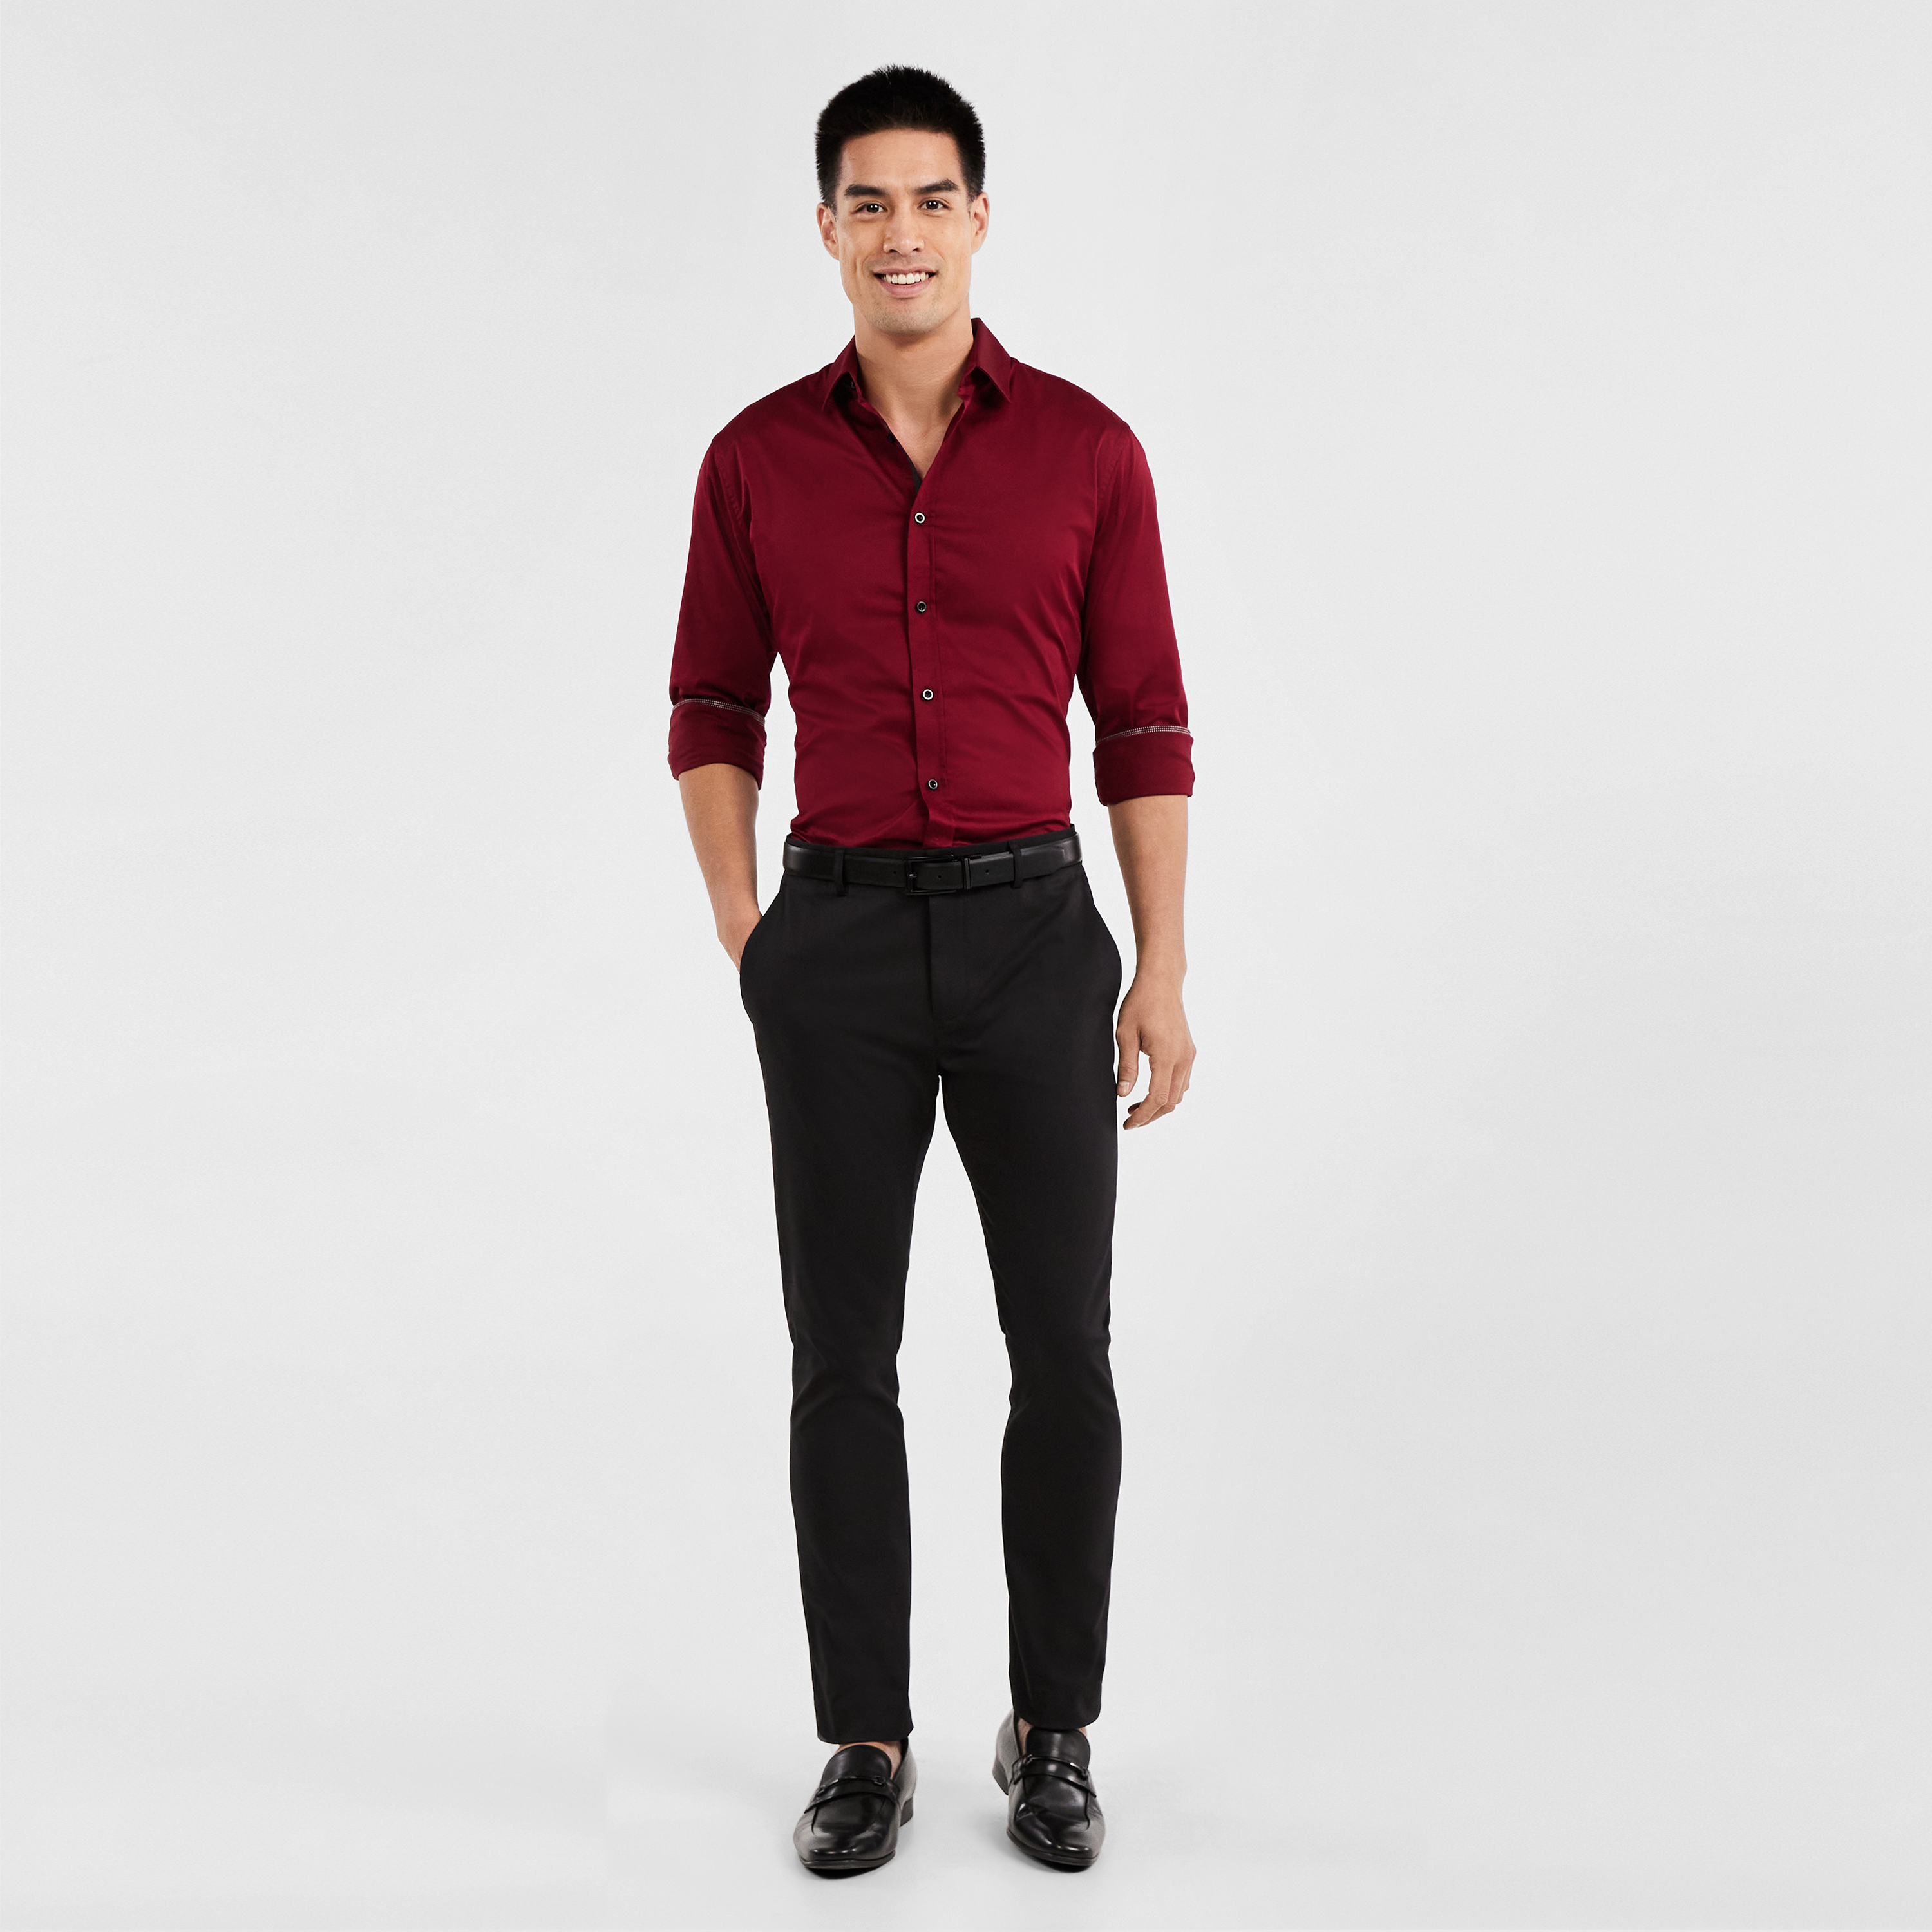 Can I wear a red shirt with tan pants? - Quora